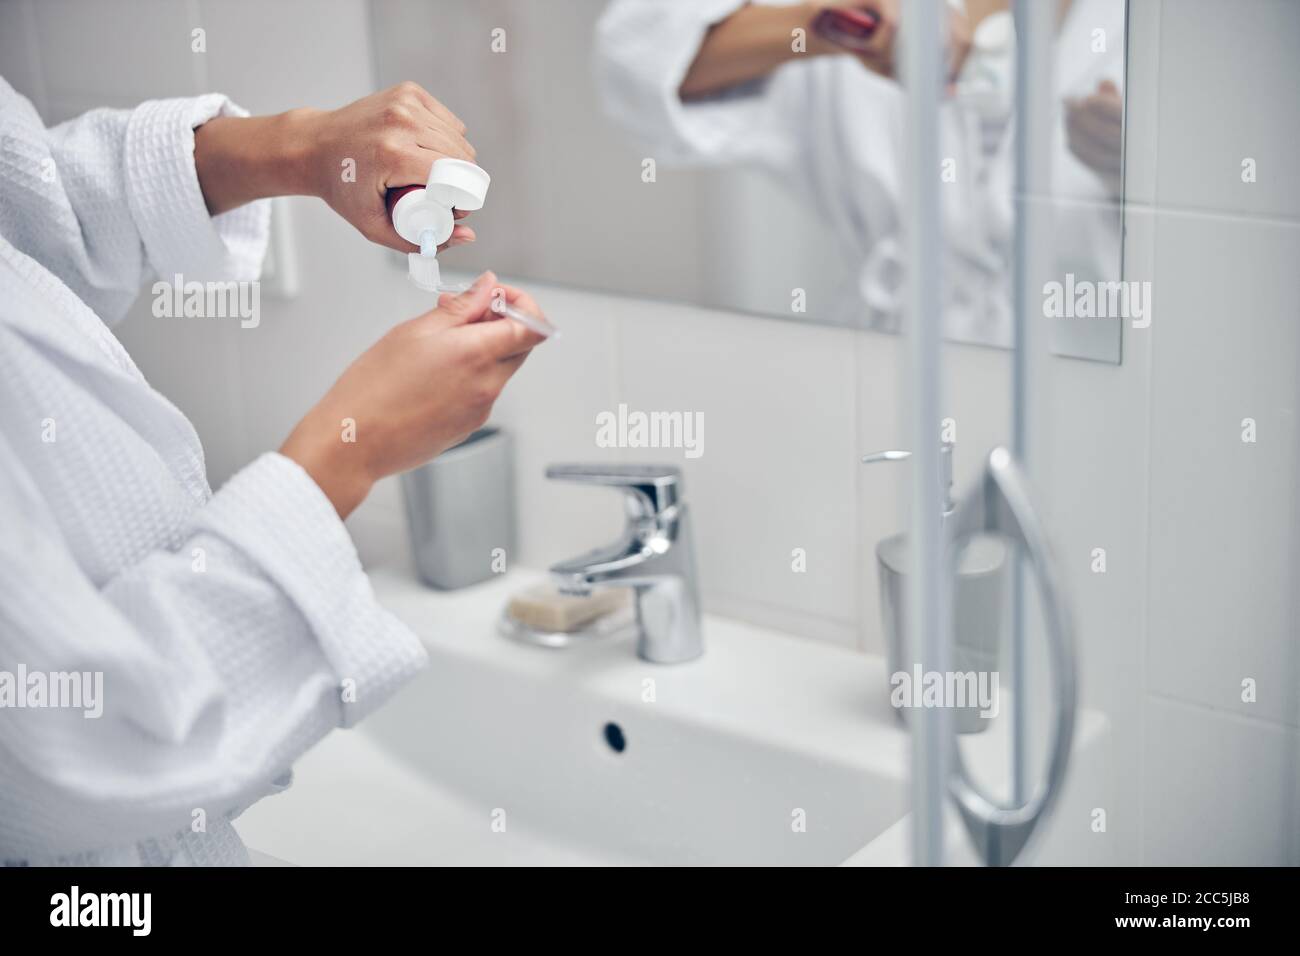 Woman taking care of her oral health Stock Photo